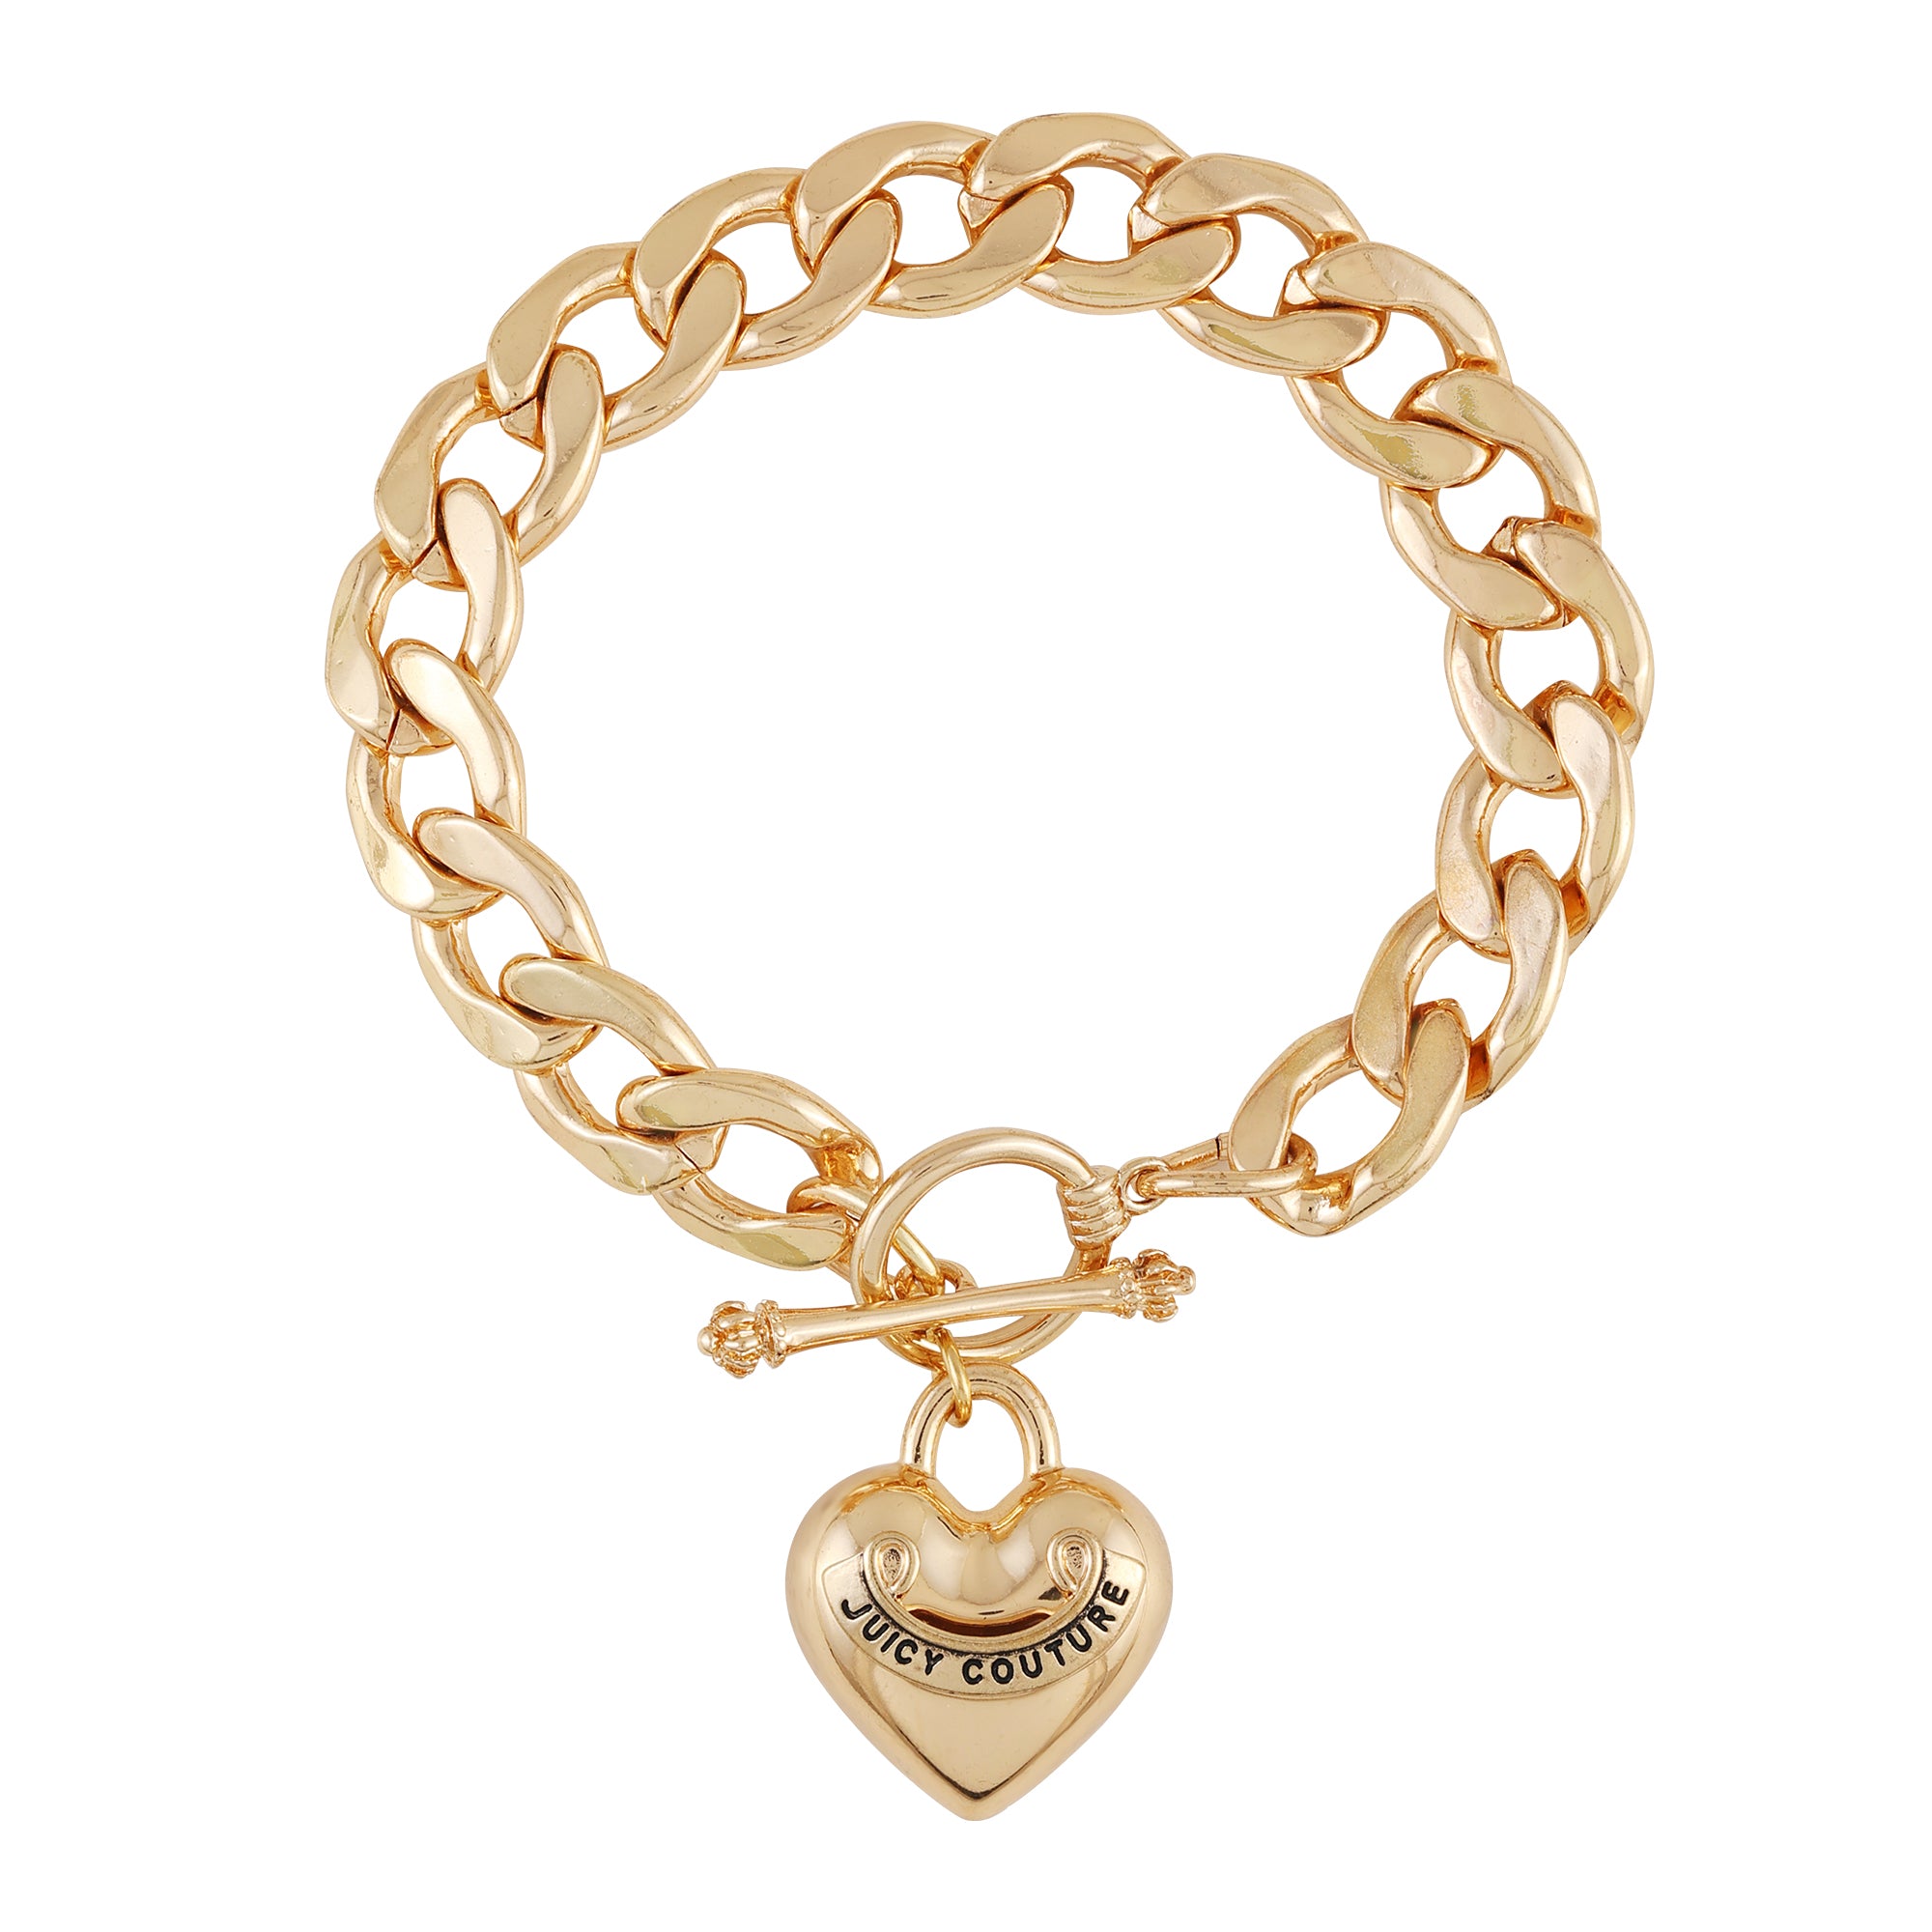 Juicy Couture Gold Plated Love Heart Chain Charm Bracelet Original